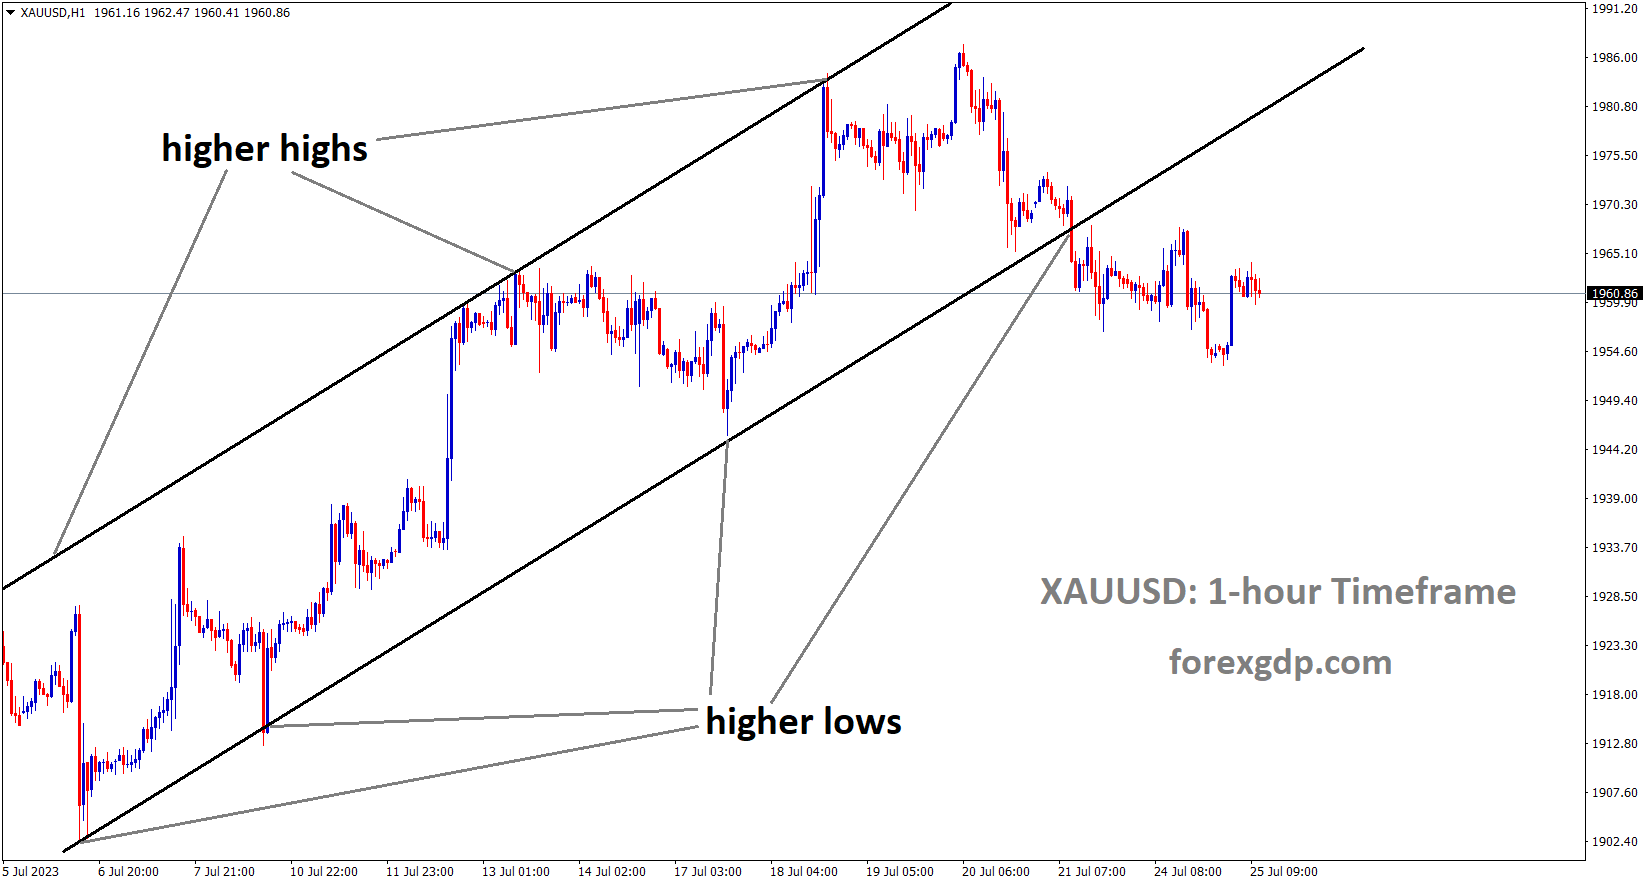 XAUUSD Gold Price is moving in an Ascending channel and the market has reached the higher low area of the channel 2